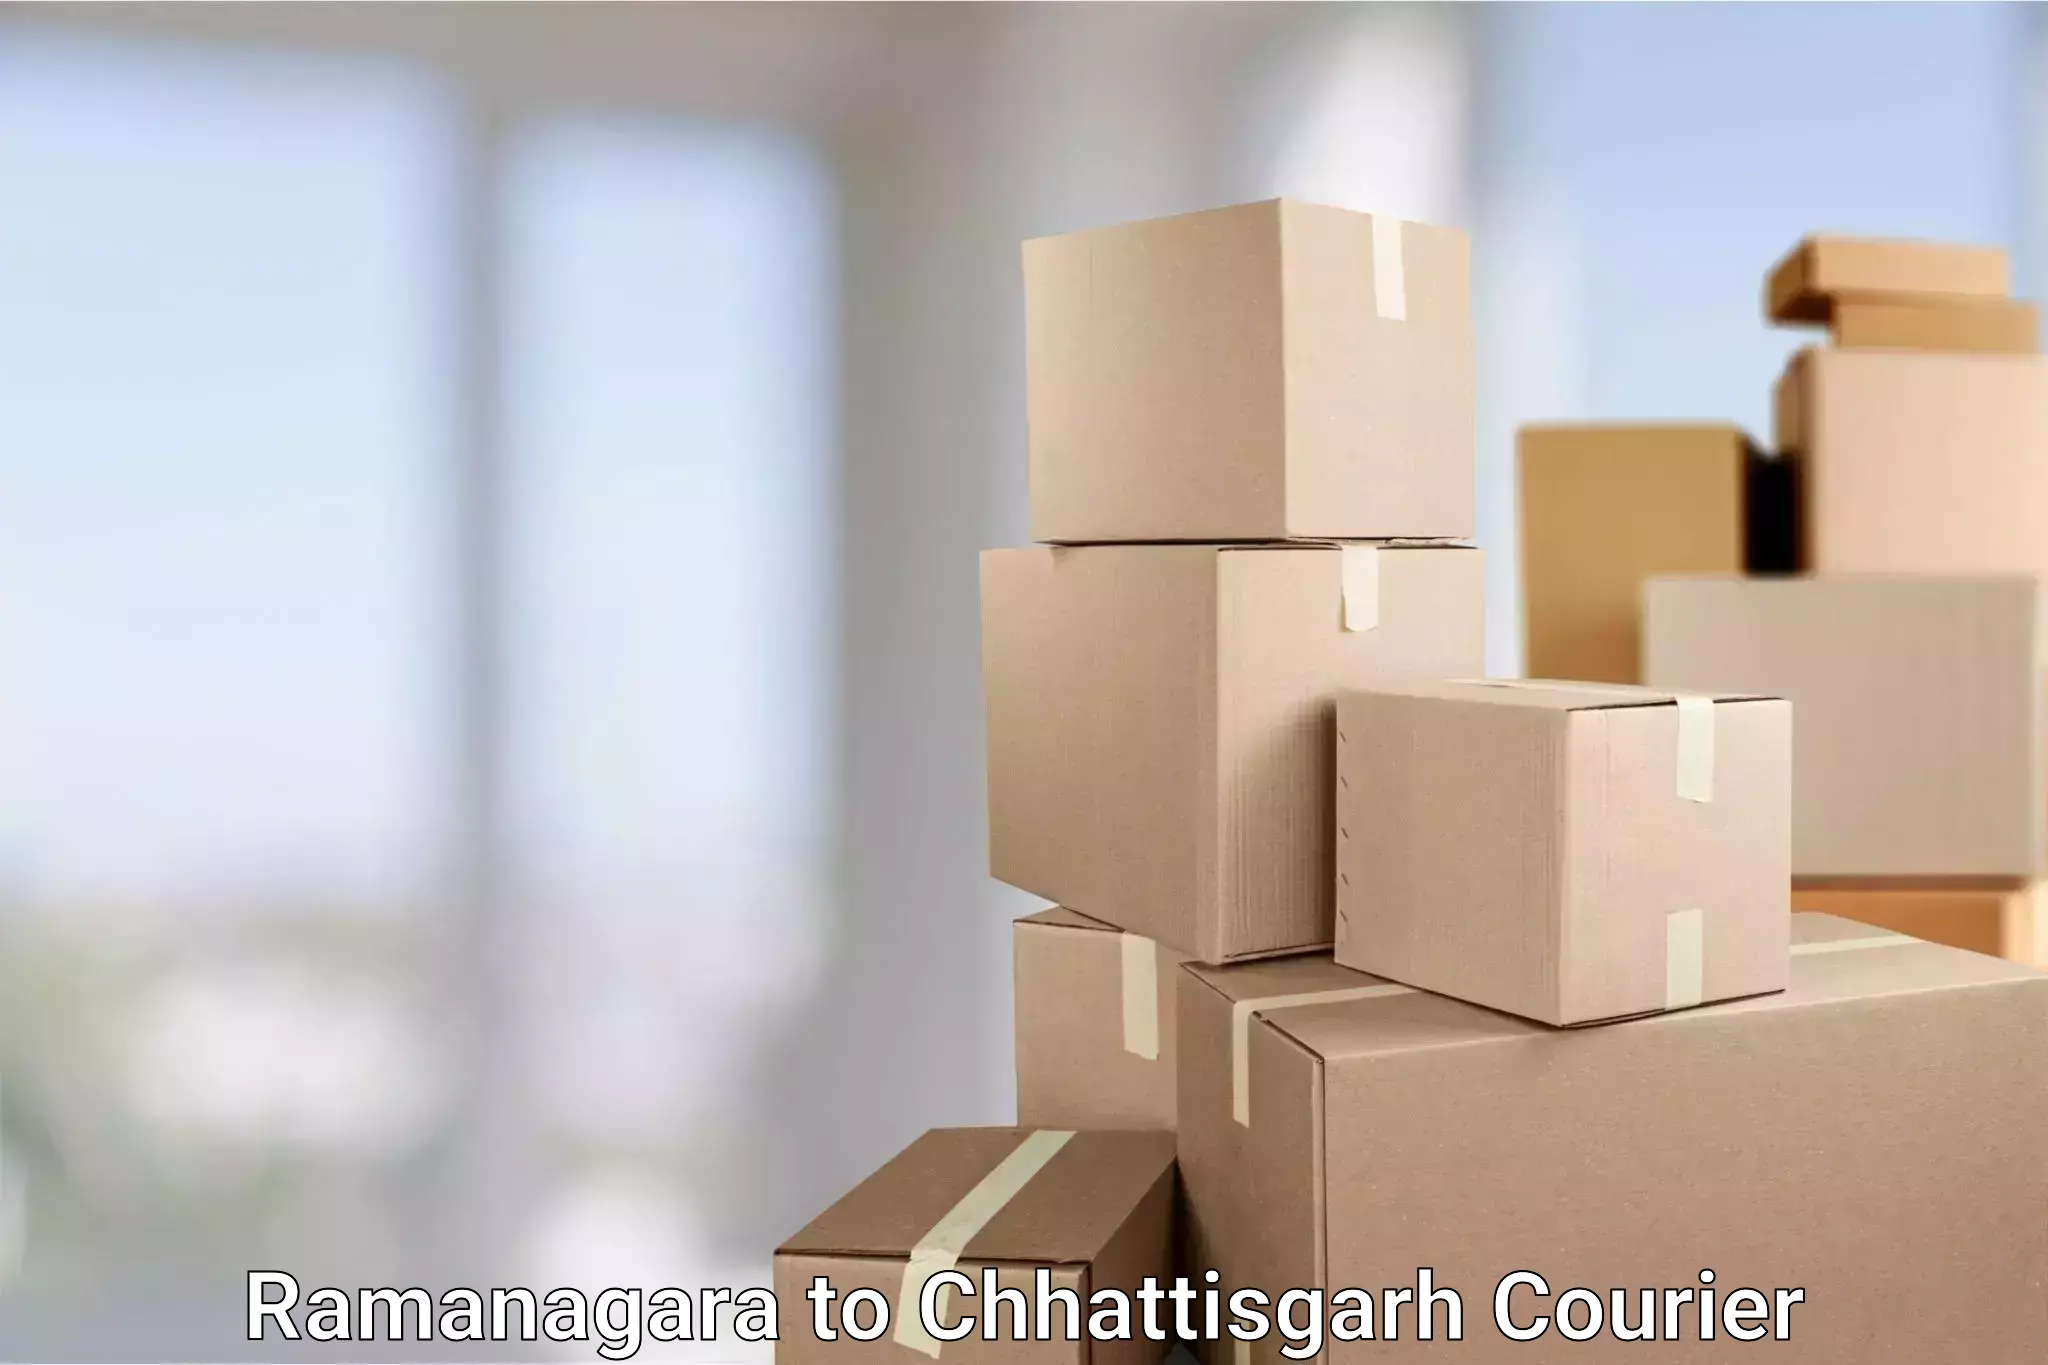 Same-day delivery solutions Ramanagara to bagbahra